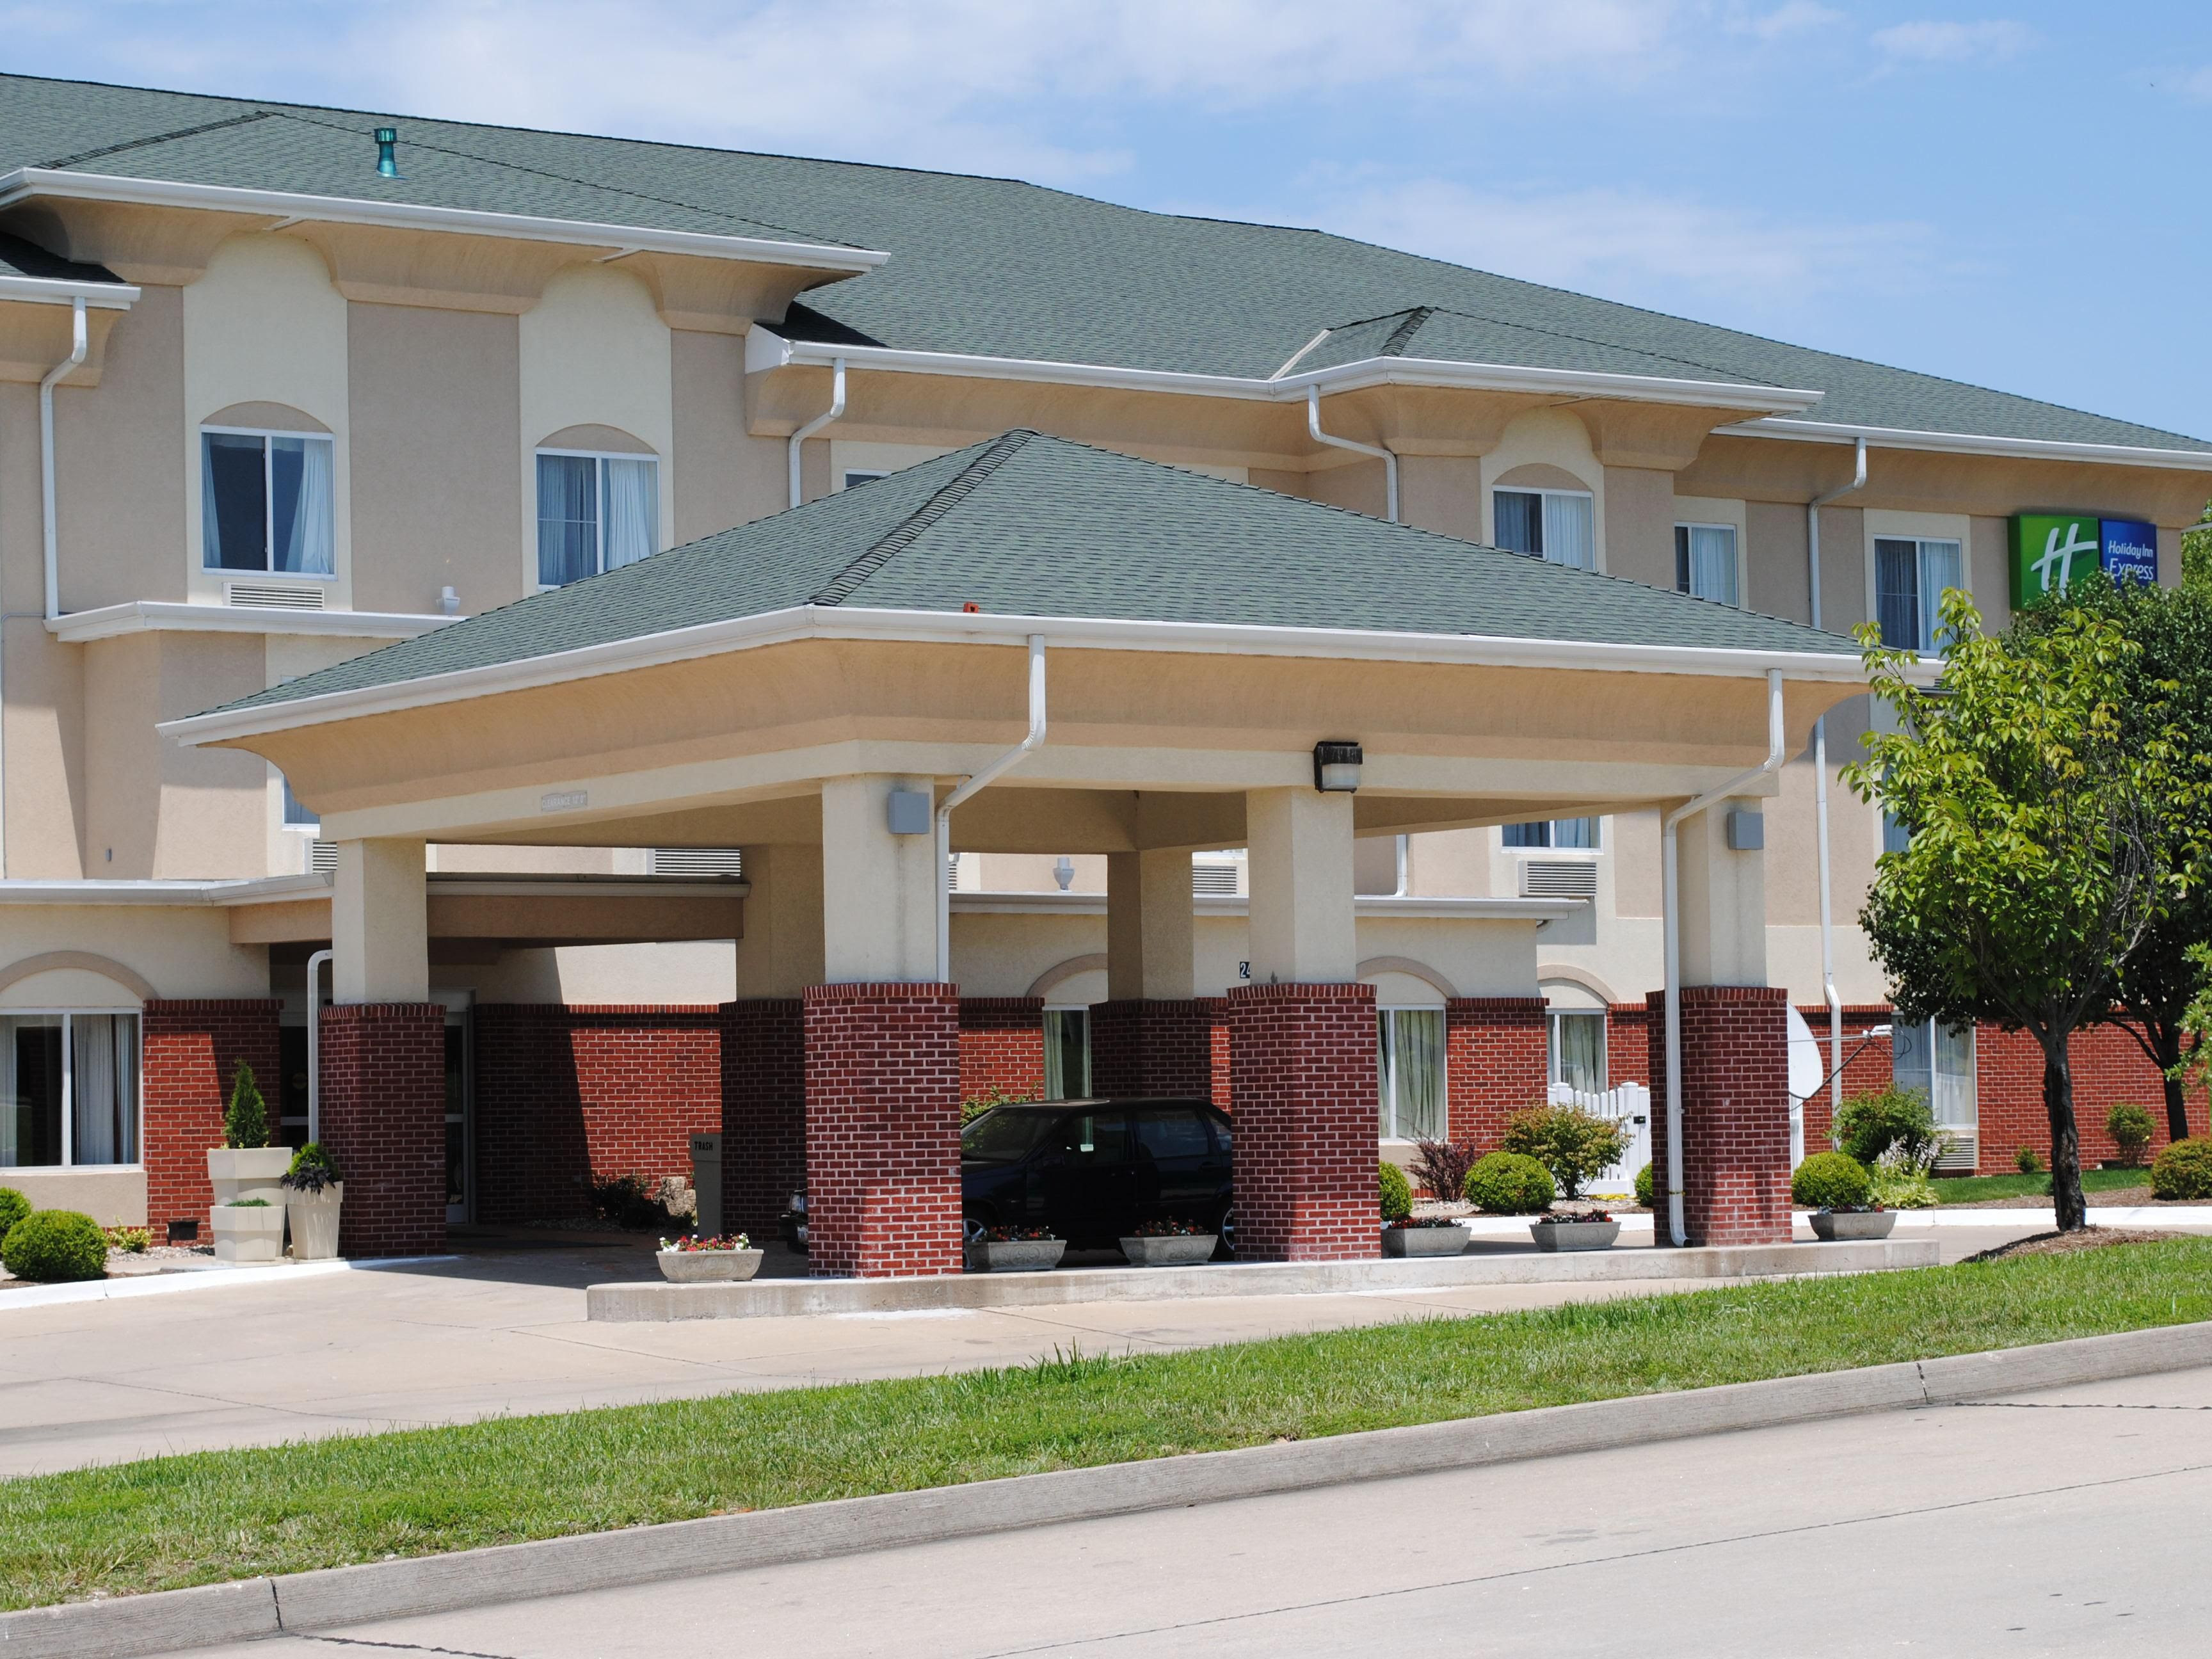 Discount [80% Off] Comfort Inn Boonville Columbia United States - Hotel Near Me | Reviews Hotel ...